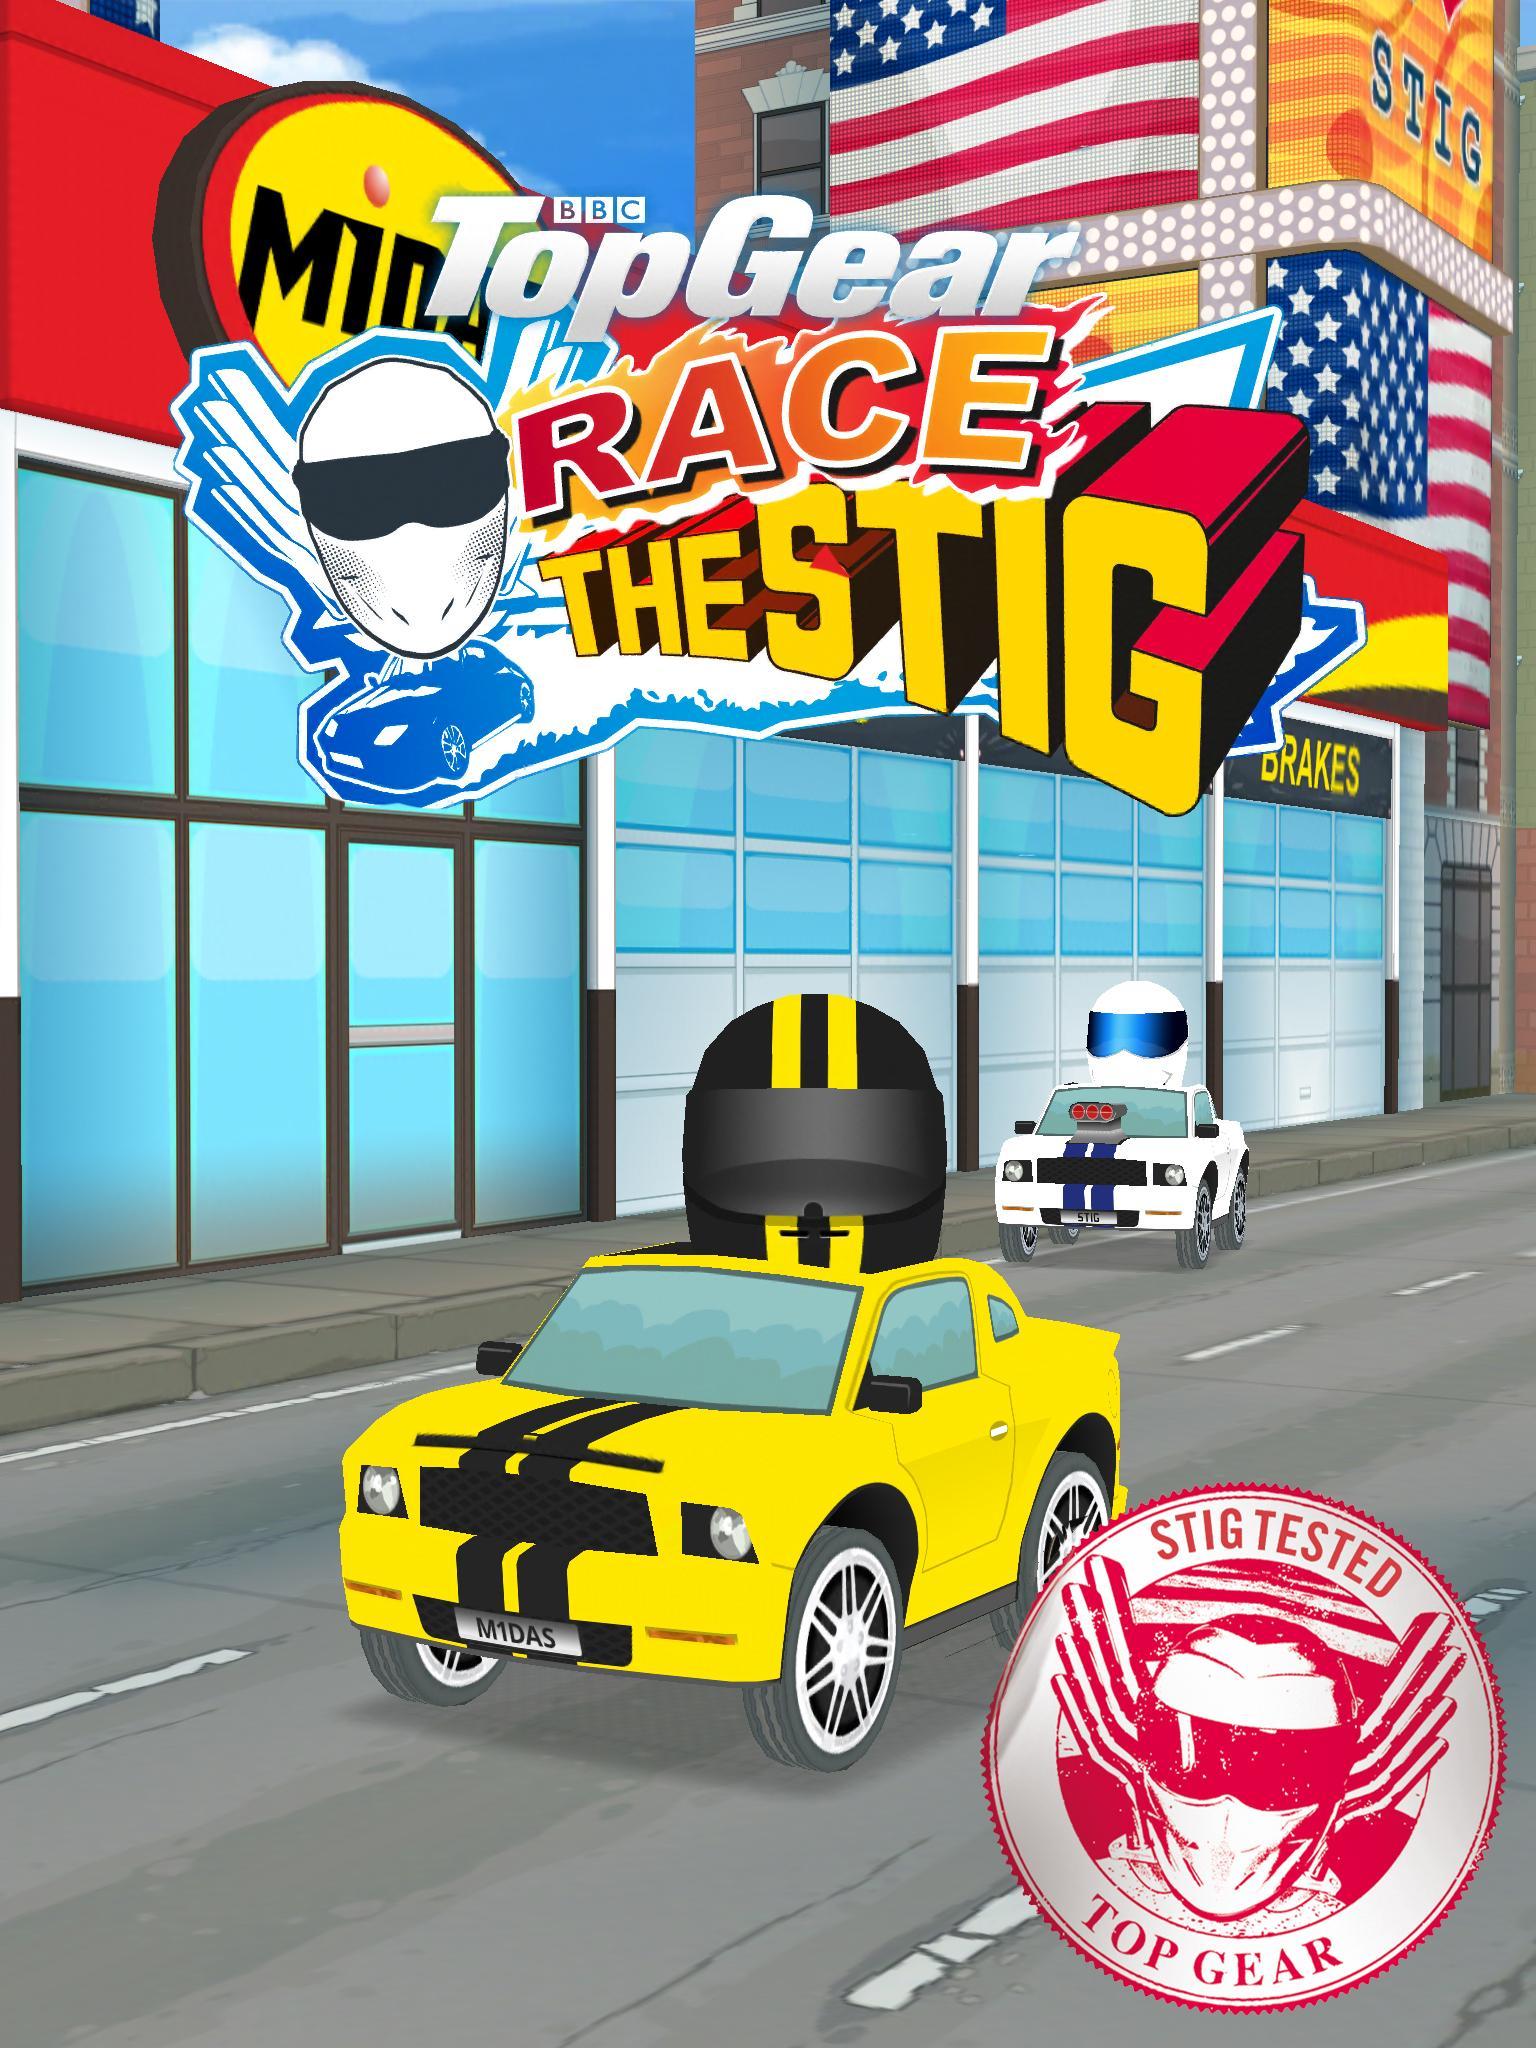 Top Gear : Race the Stig for Android - APK Download